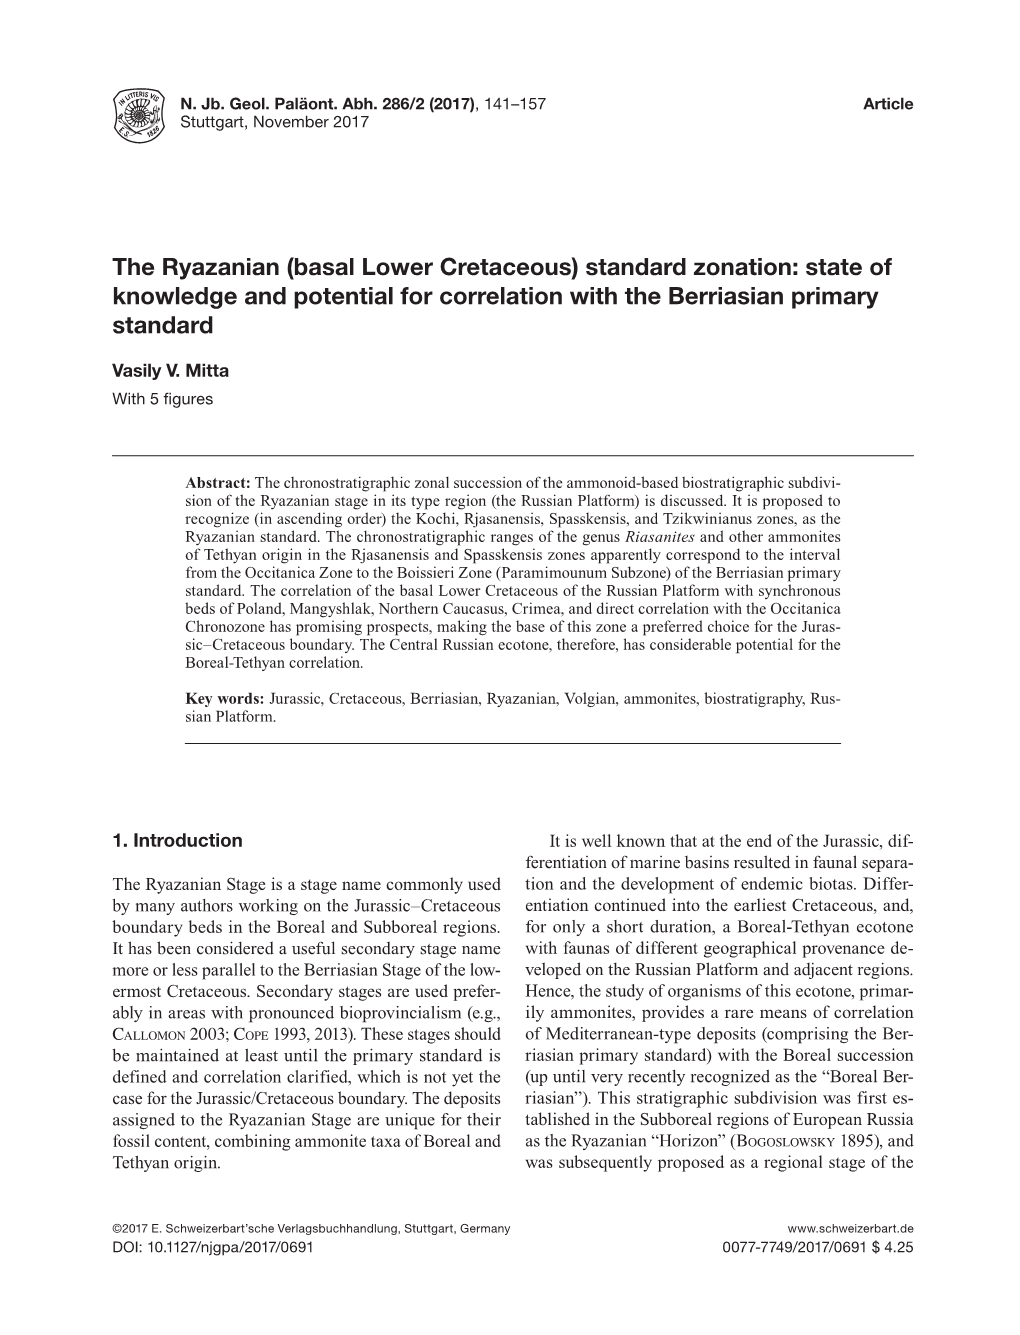 The Ryazanian (Basal Lower Cretaceous) Standard Zonation: State of Knowledge and Potential for Correlation with the Berriasian Primary Standard